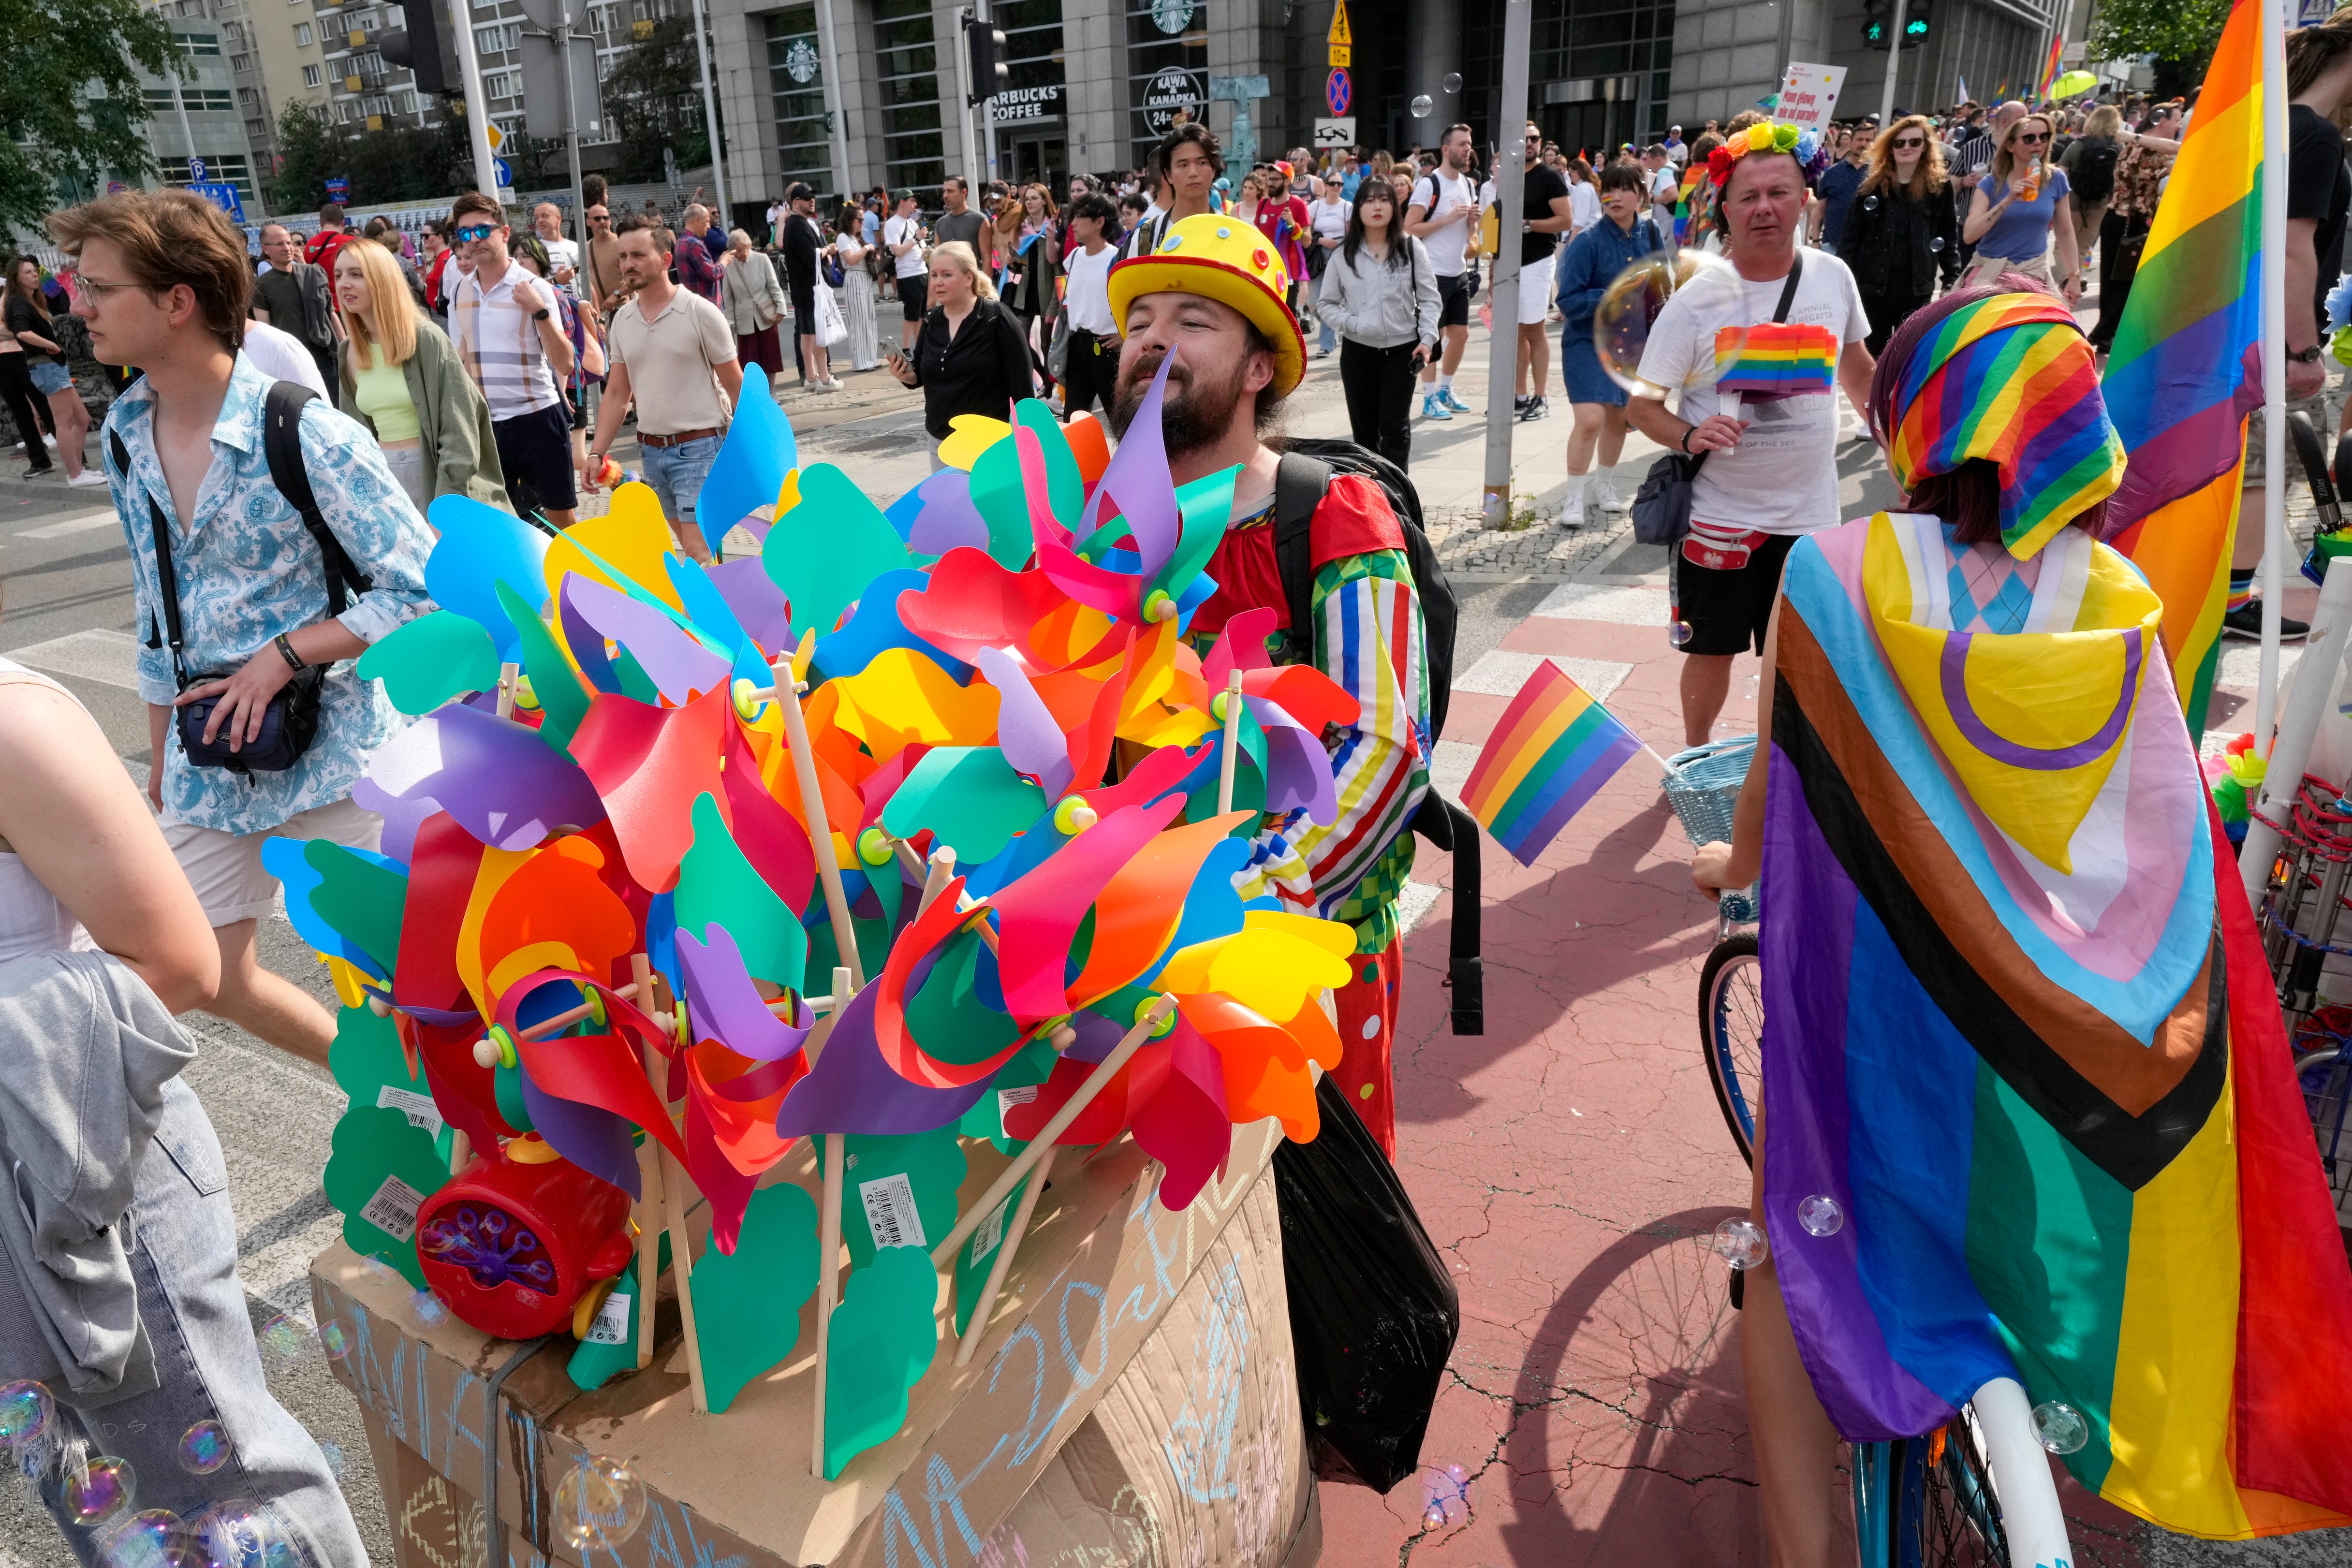 People take part in Poland’s yearly Pride parade, known as the Equality Parade, in Warsaw, Poland